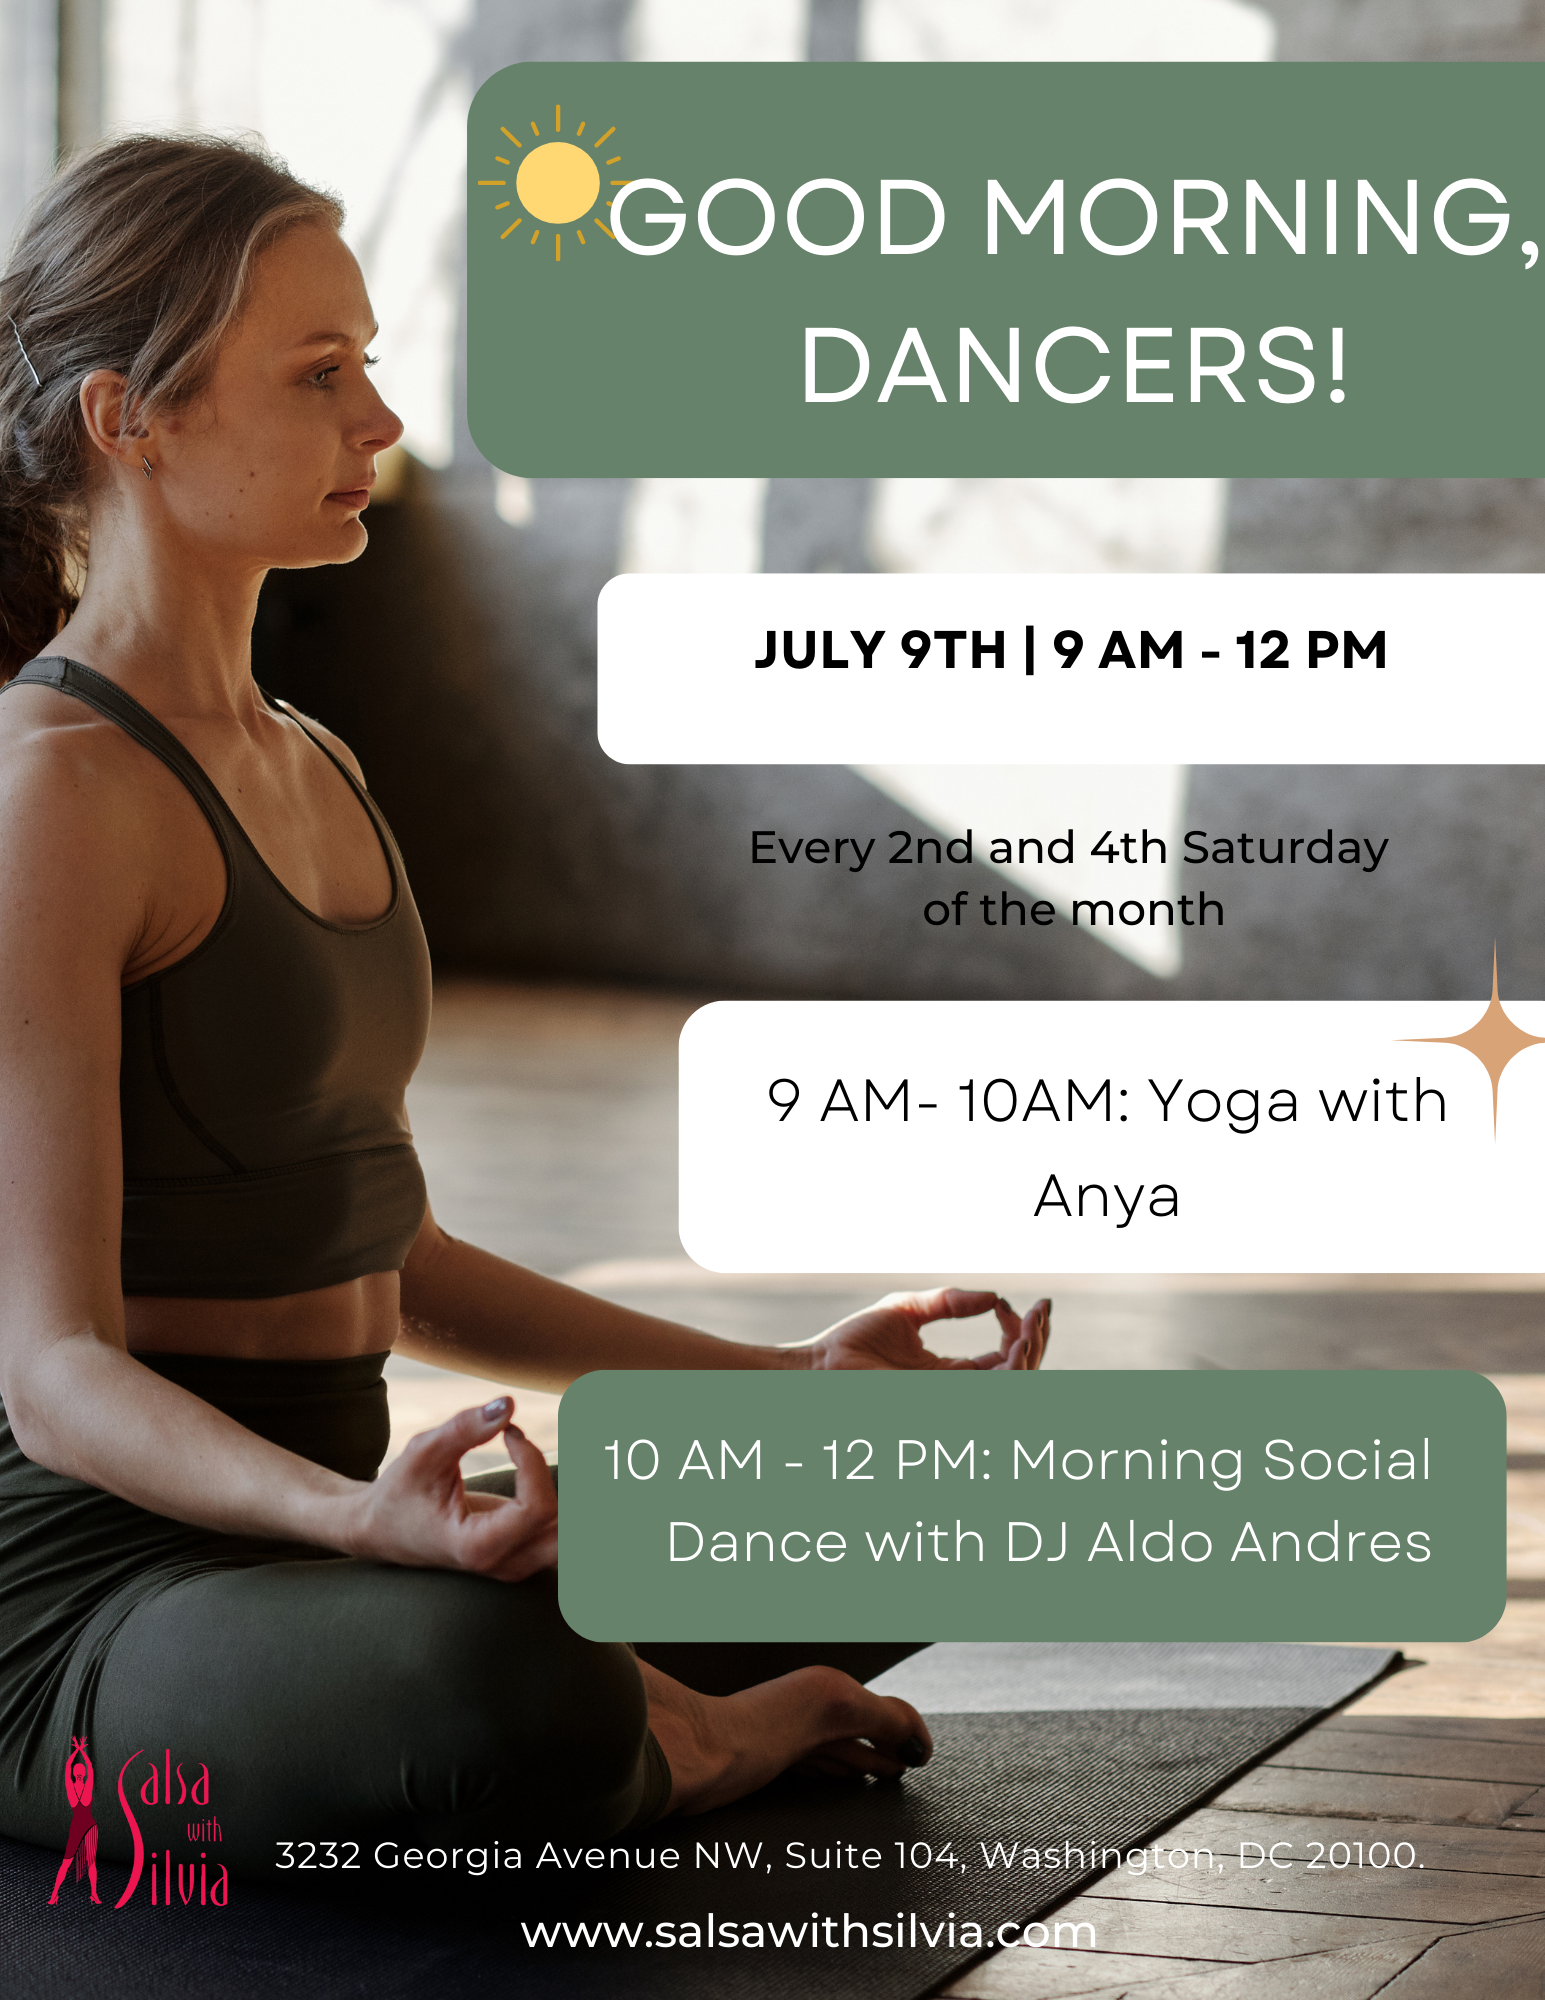 Saturday Morning Social Dance Party with DJ Aldo Andres GOOD MORNING, DANCERS! Health & Wellness Class + Morning Social